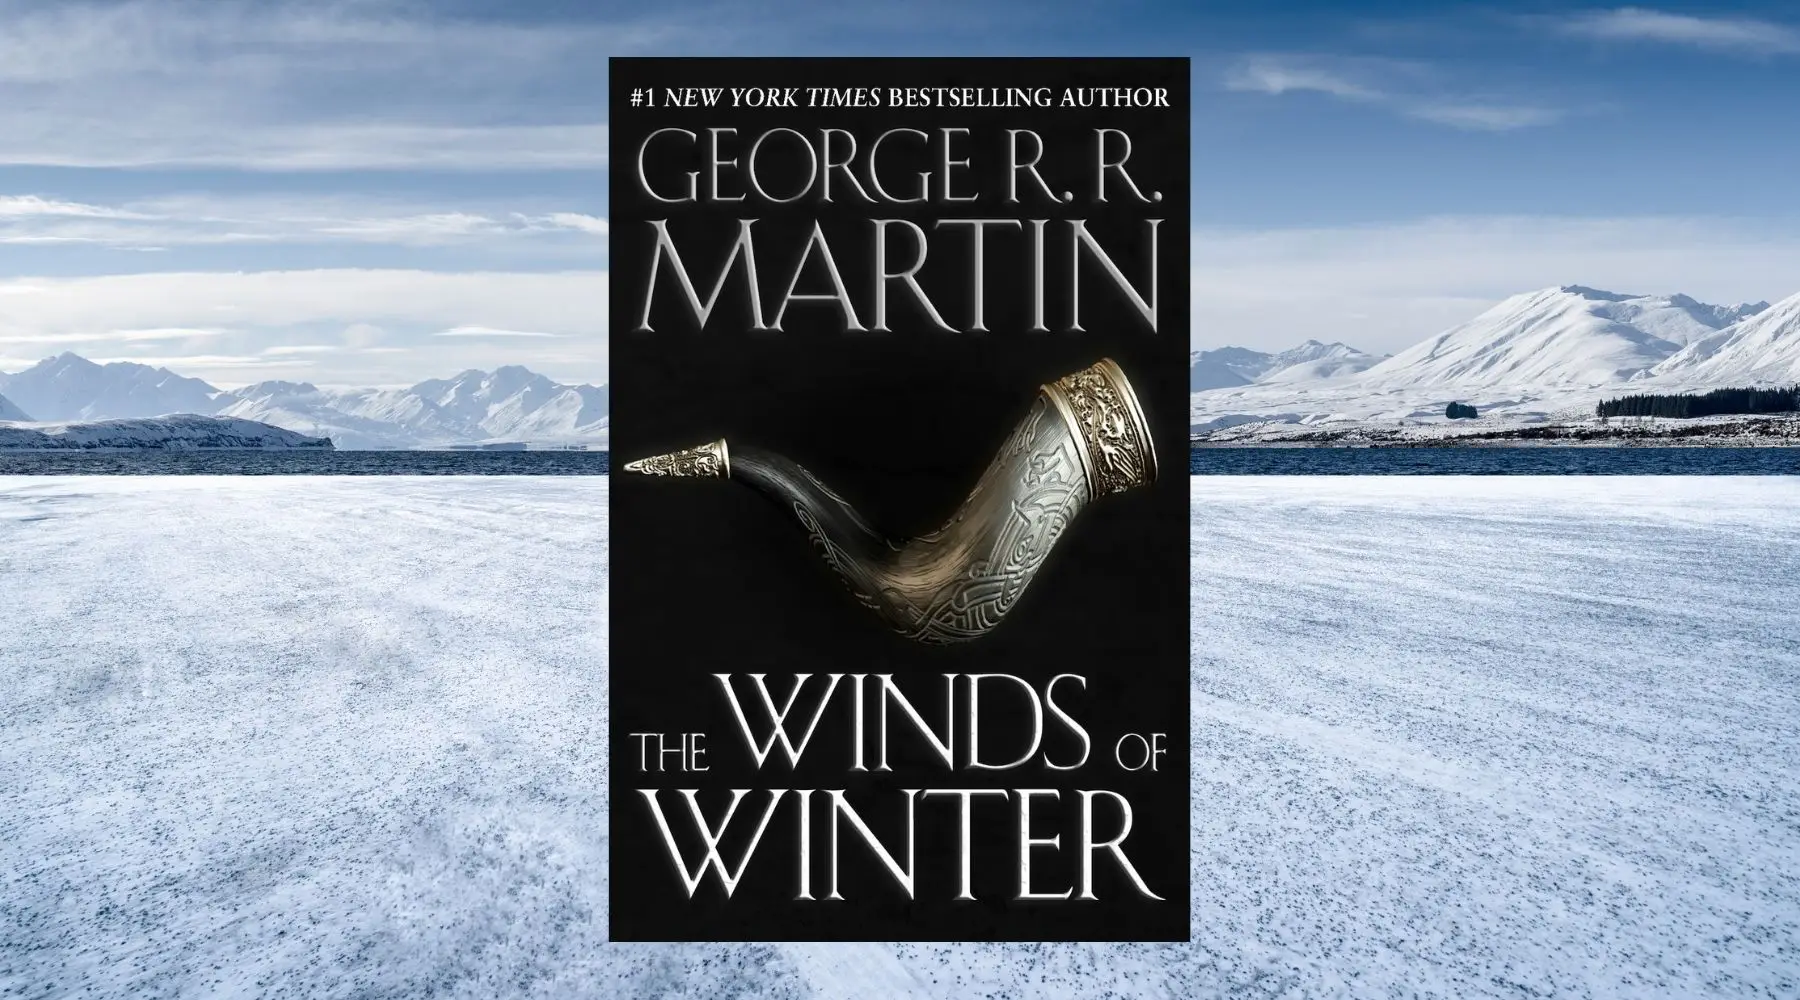 When will RR Martin's The Winds of Winter come out? [Updated]